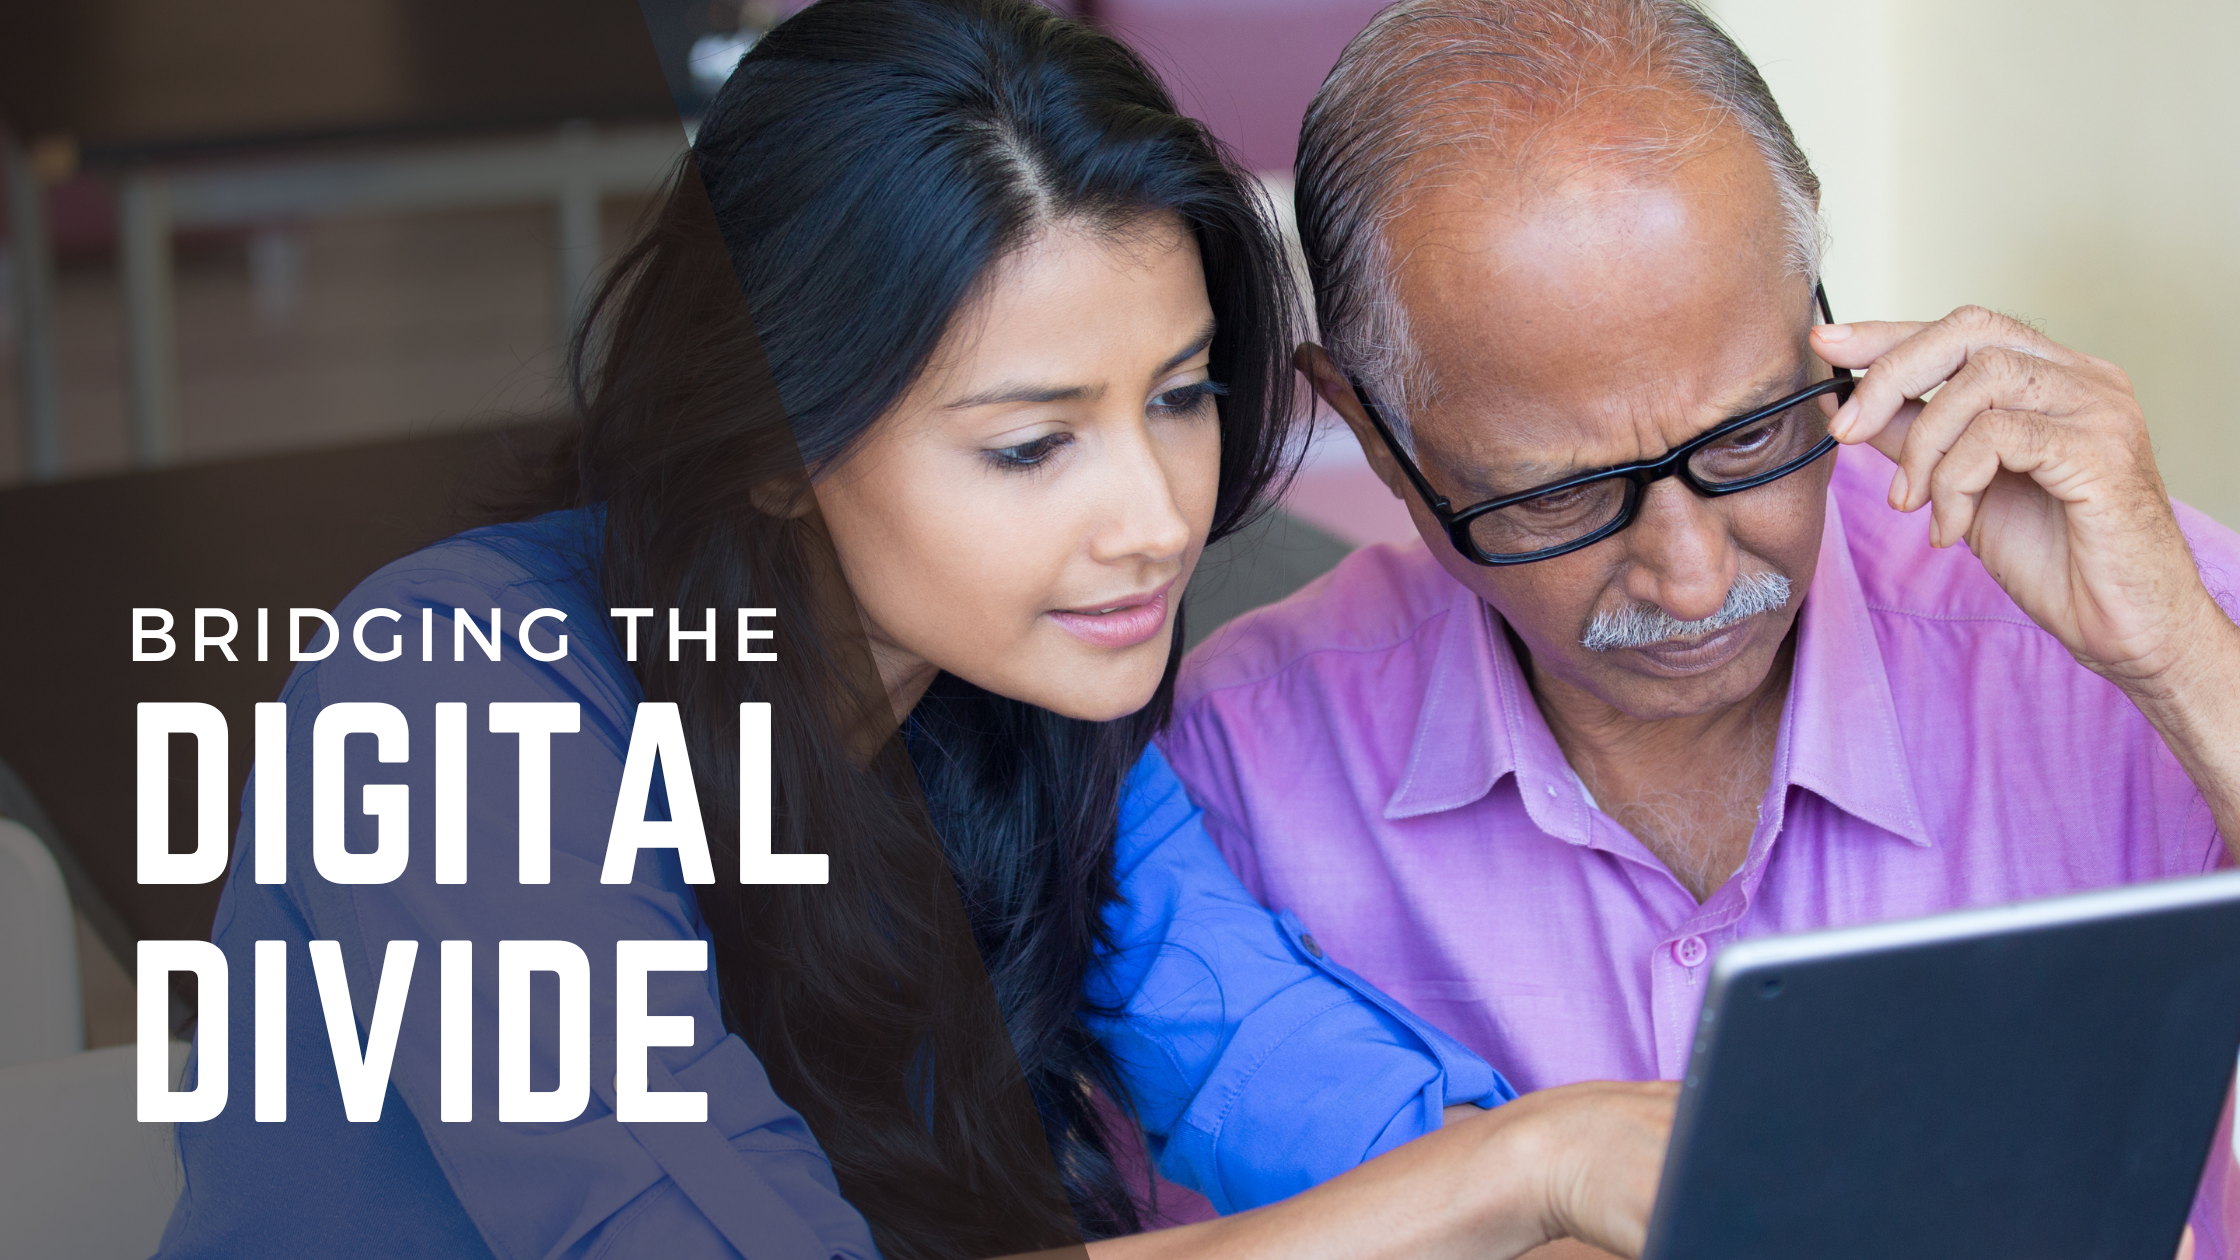 10 Ways Health Plans and Health Care Organizations can Bridge the Digital Divide